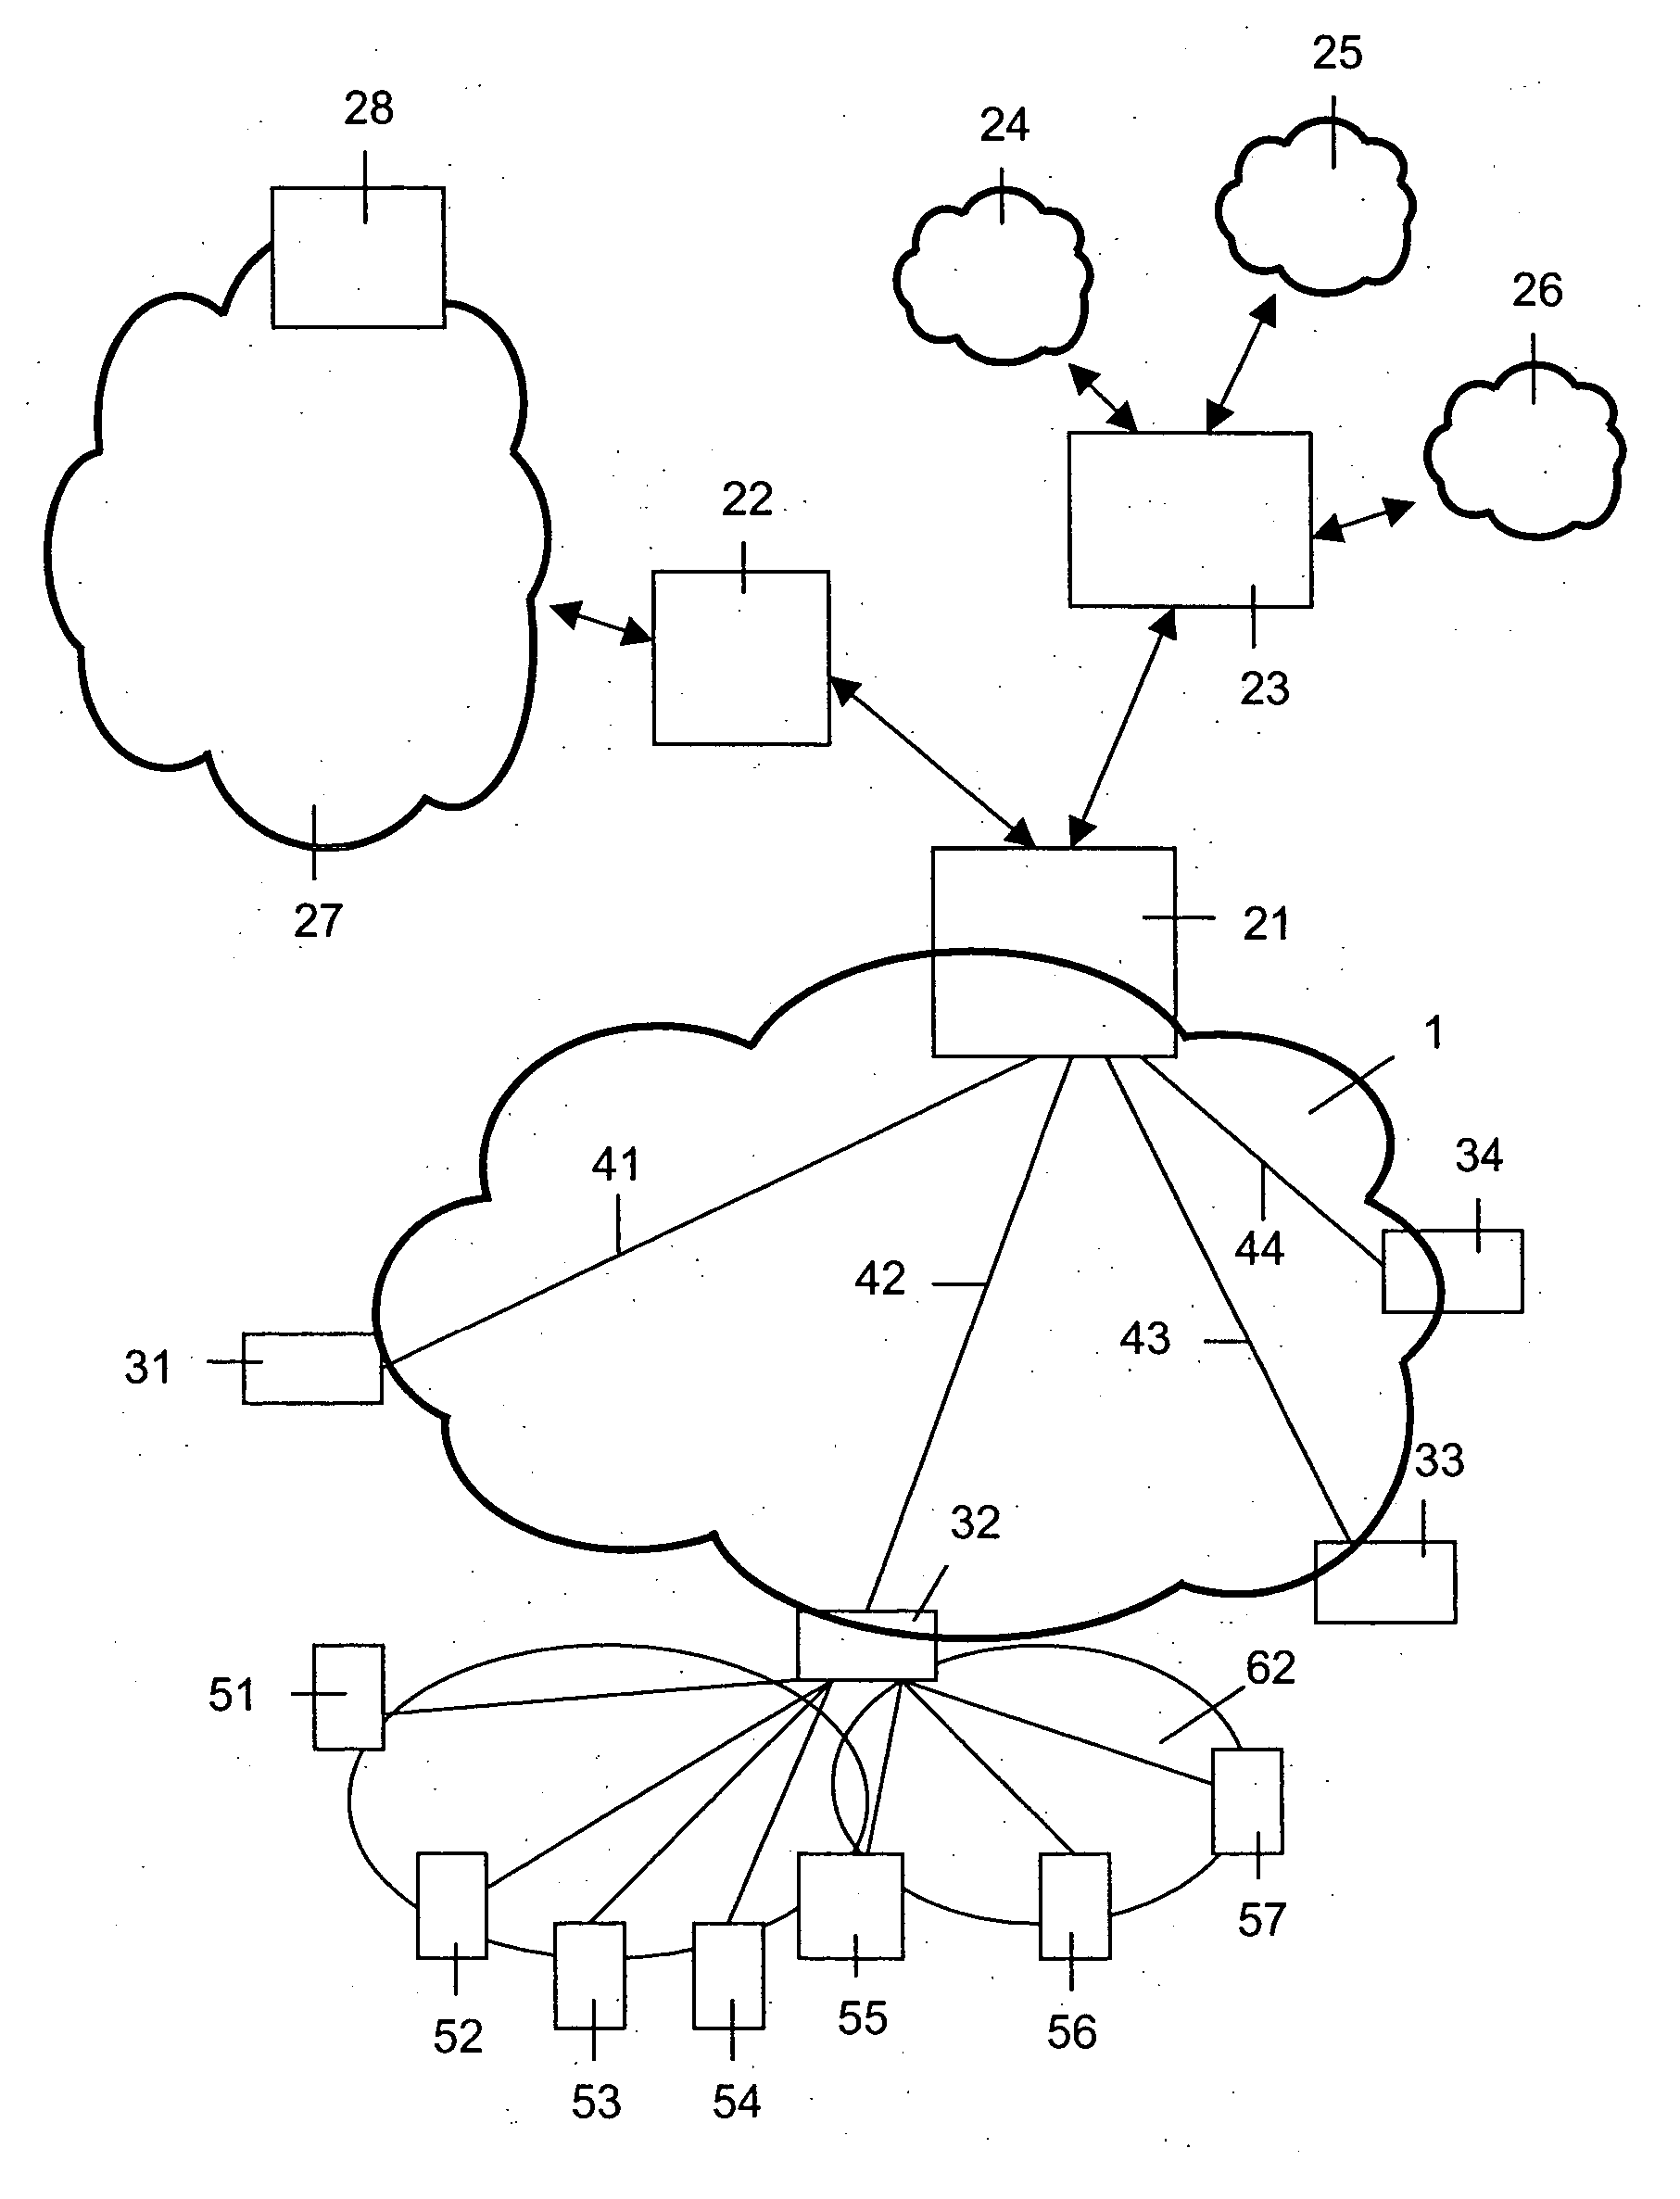 Method of providing multi-media communications over a DSL access network